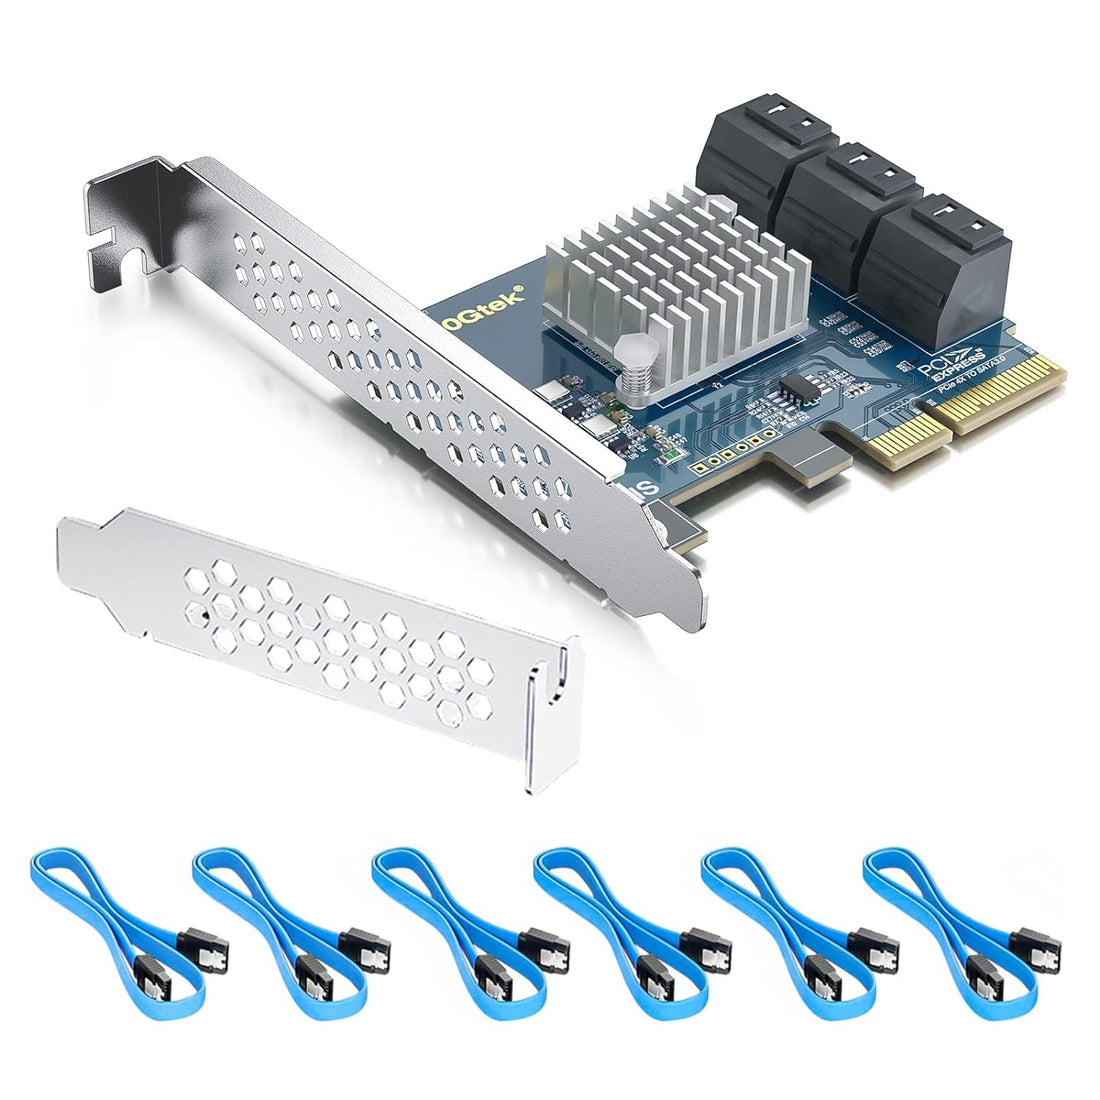 10Gtek PCIe SATA Card 6 Port with 6 SATA Cables and Low Profile Bracket, 6Gbps SATA3.0 Controller PCI Express Expansion Card, X2, Support 6 SATA 3.0 Devices